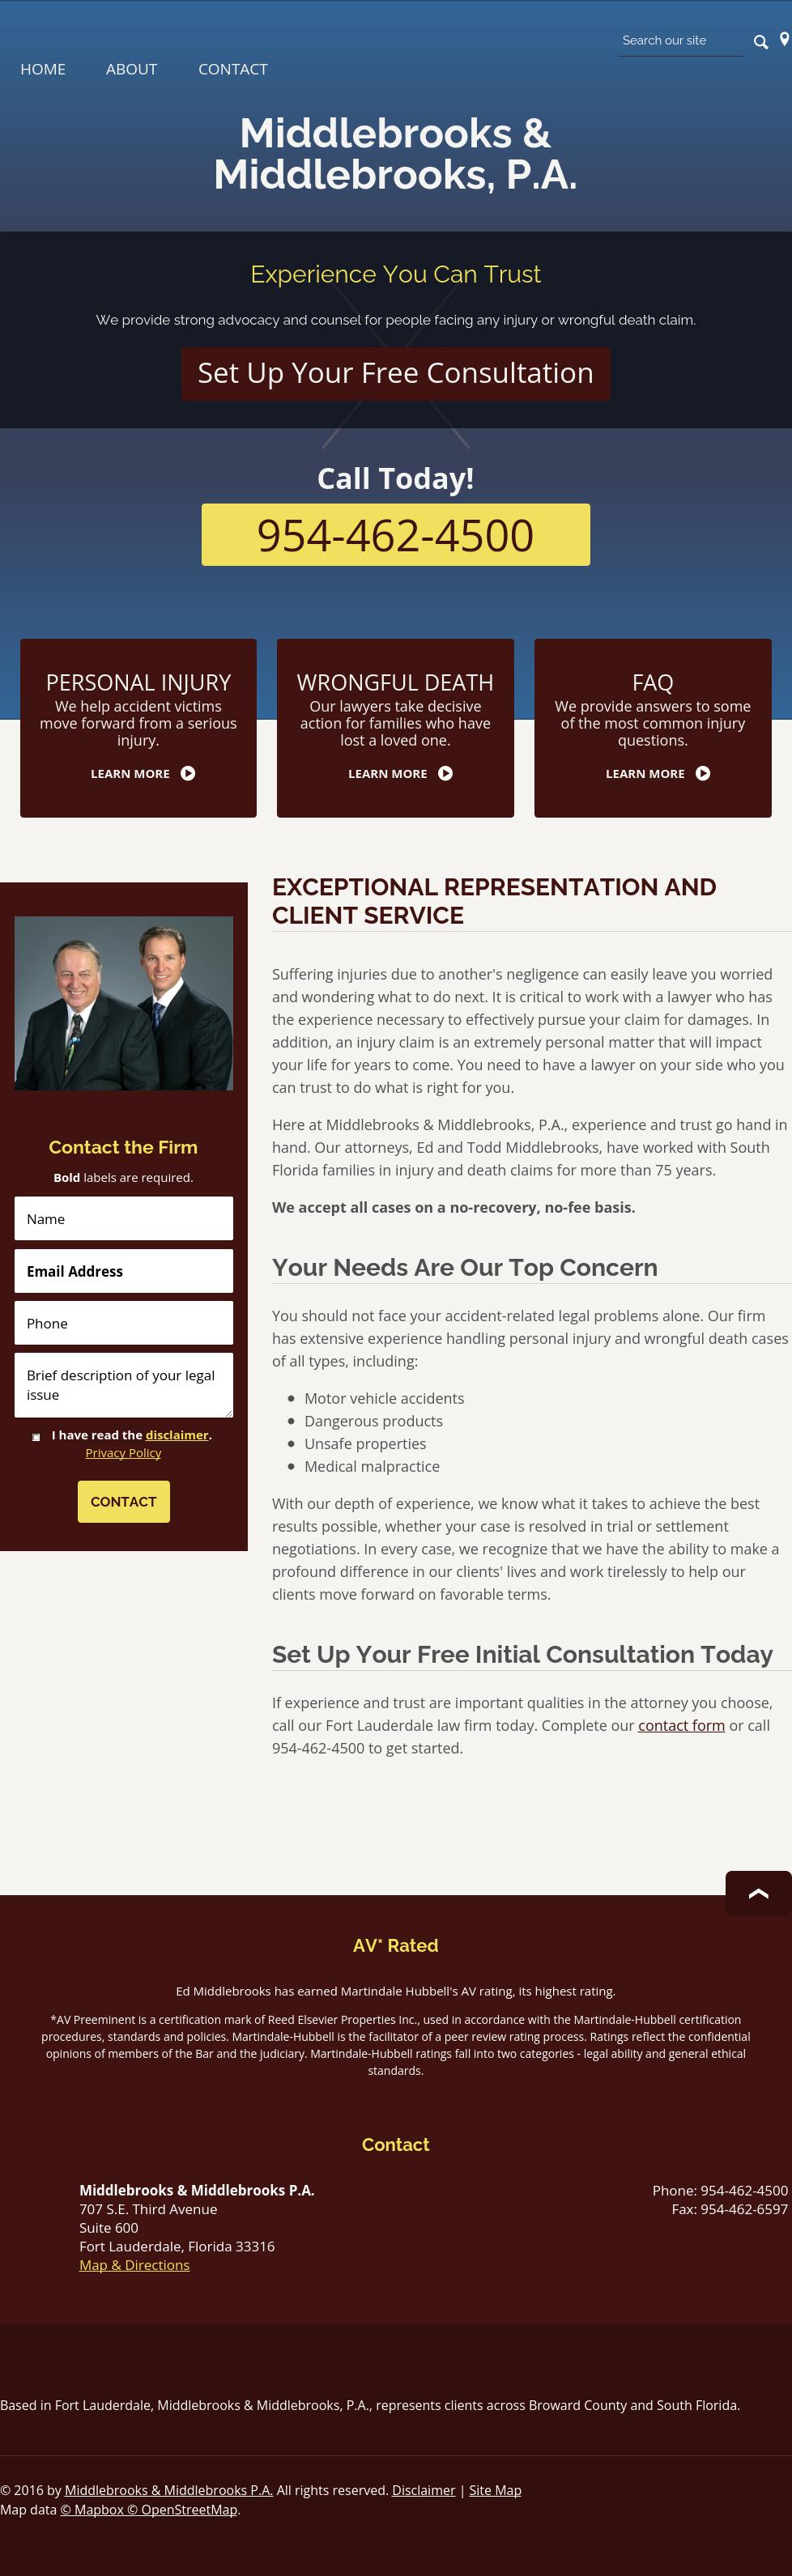 Middlebrooks & Middlebrooks P.A. - Fort Lauderdale FL Lawyers